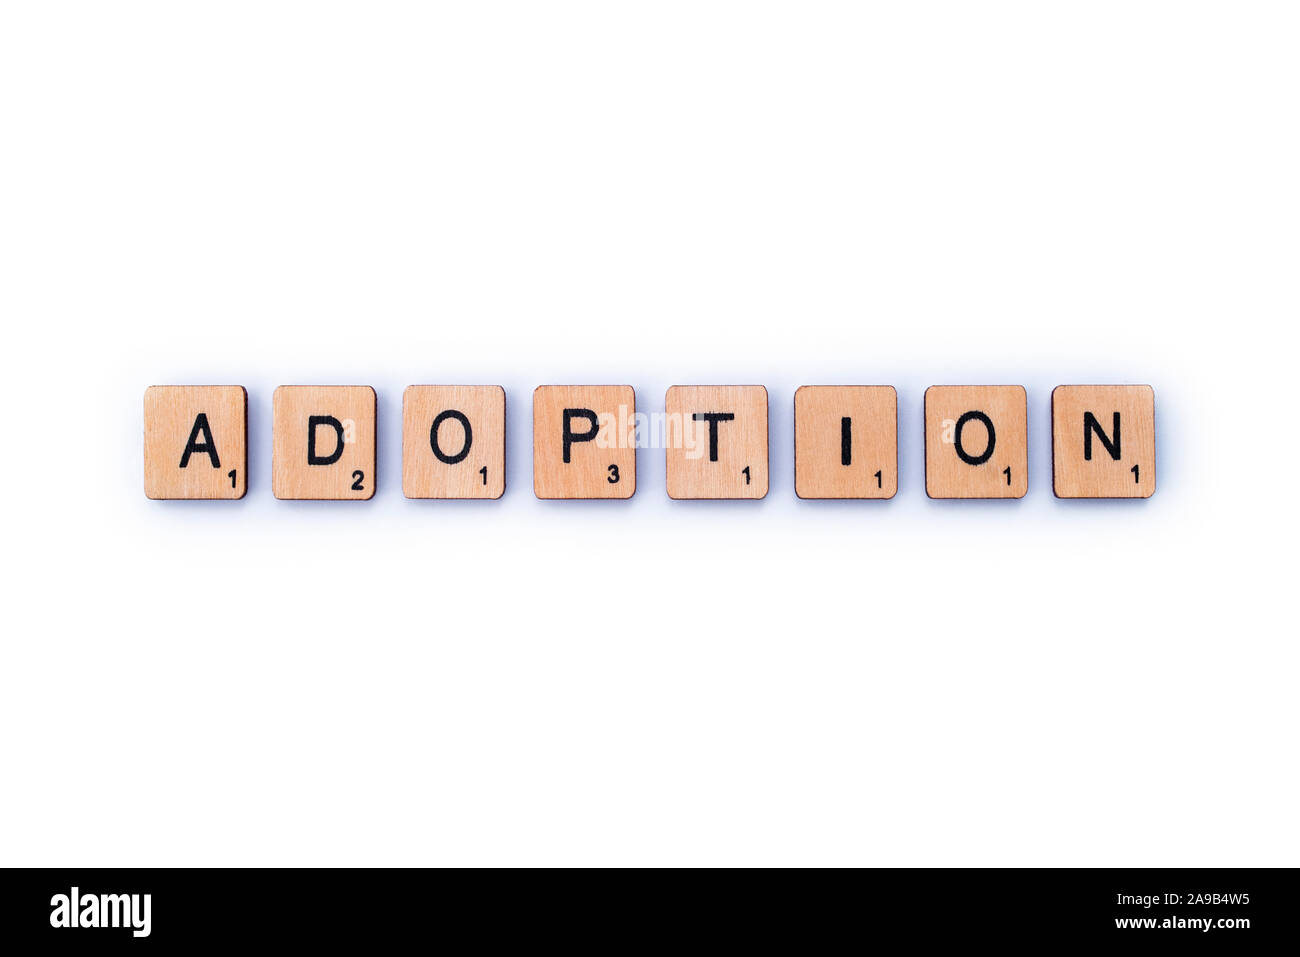 London, UK - February 6th 2019: The word ADOPTION, spelt out with wooden letter tiles. Stock Photo